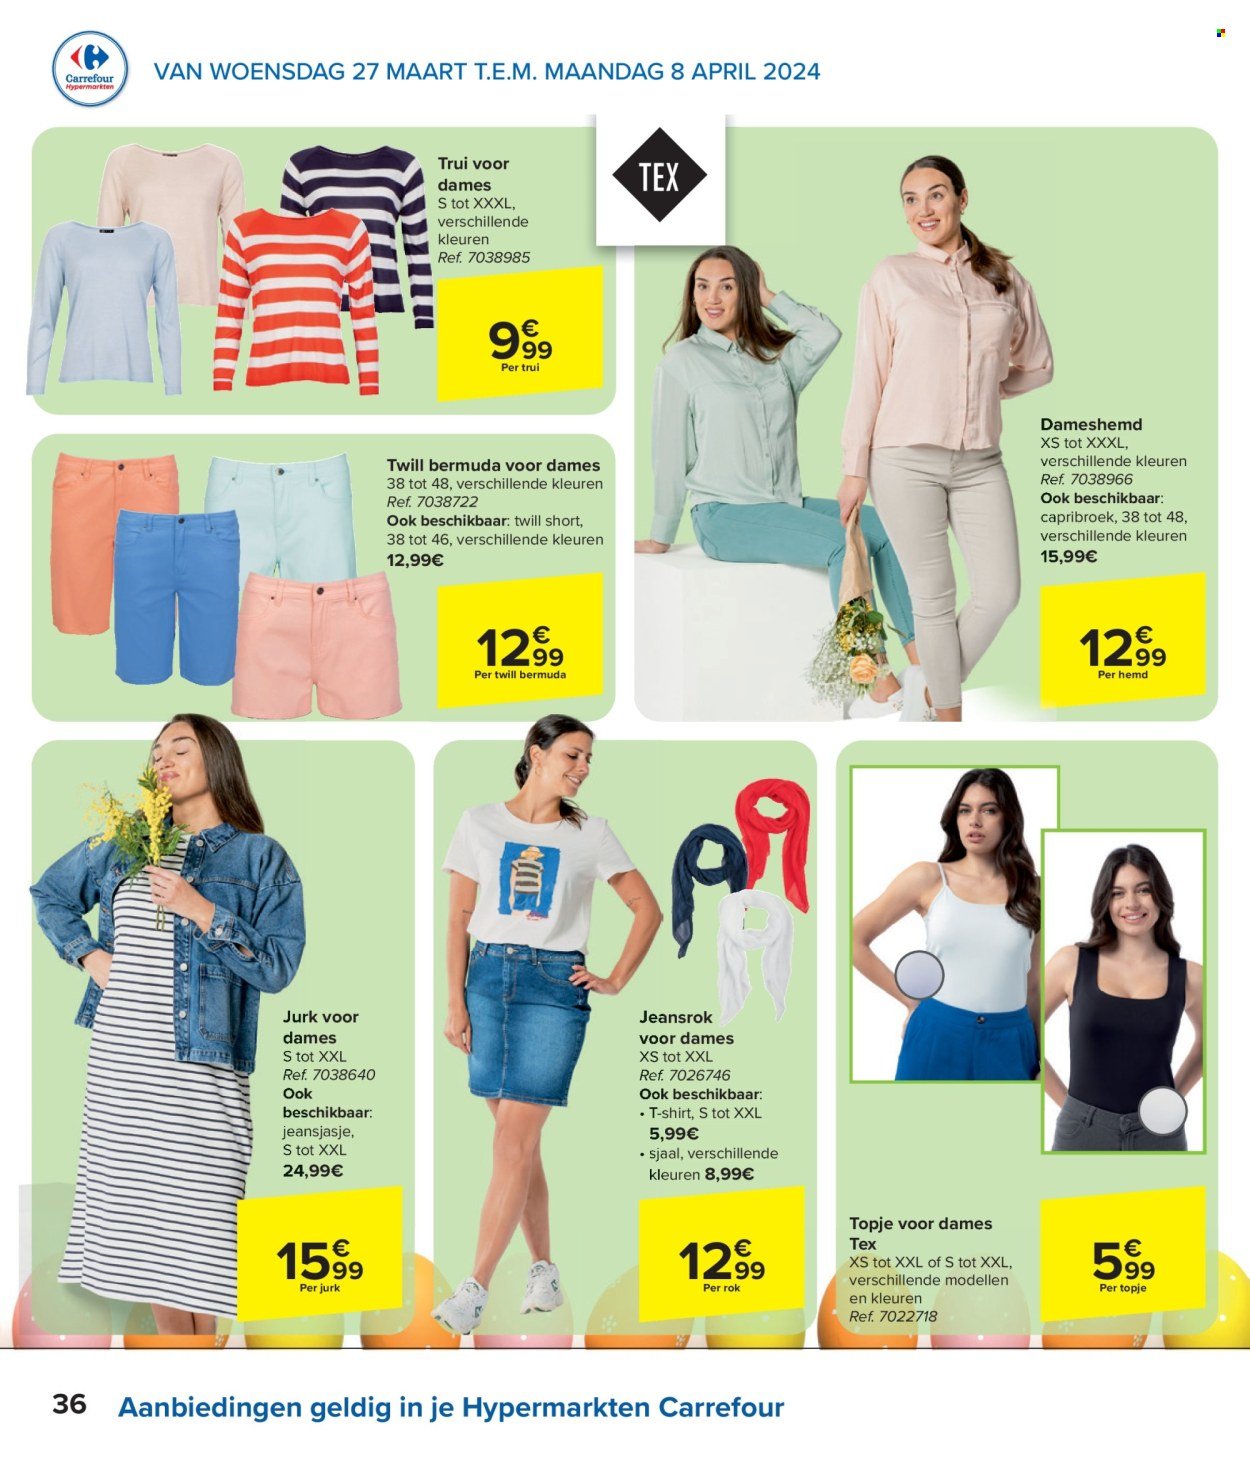 Catalogue Carrefour hypermarkt - 27.3.2024 - 8.4.2024. Page 36.